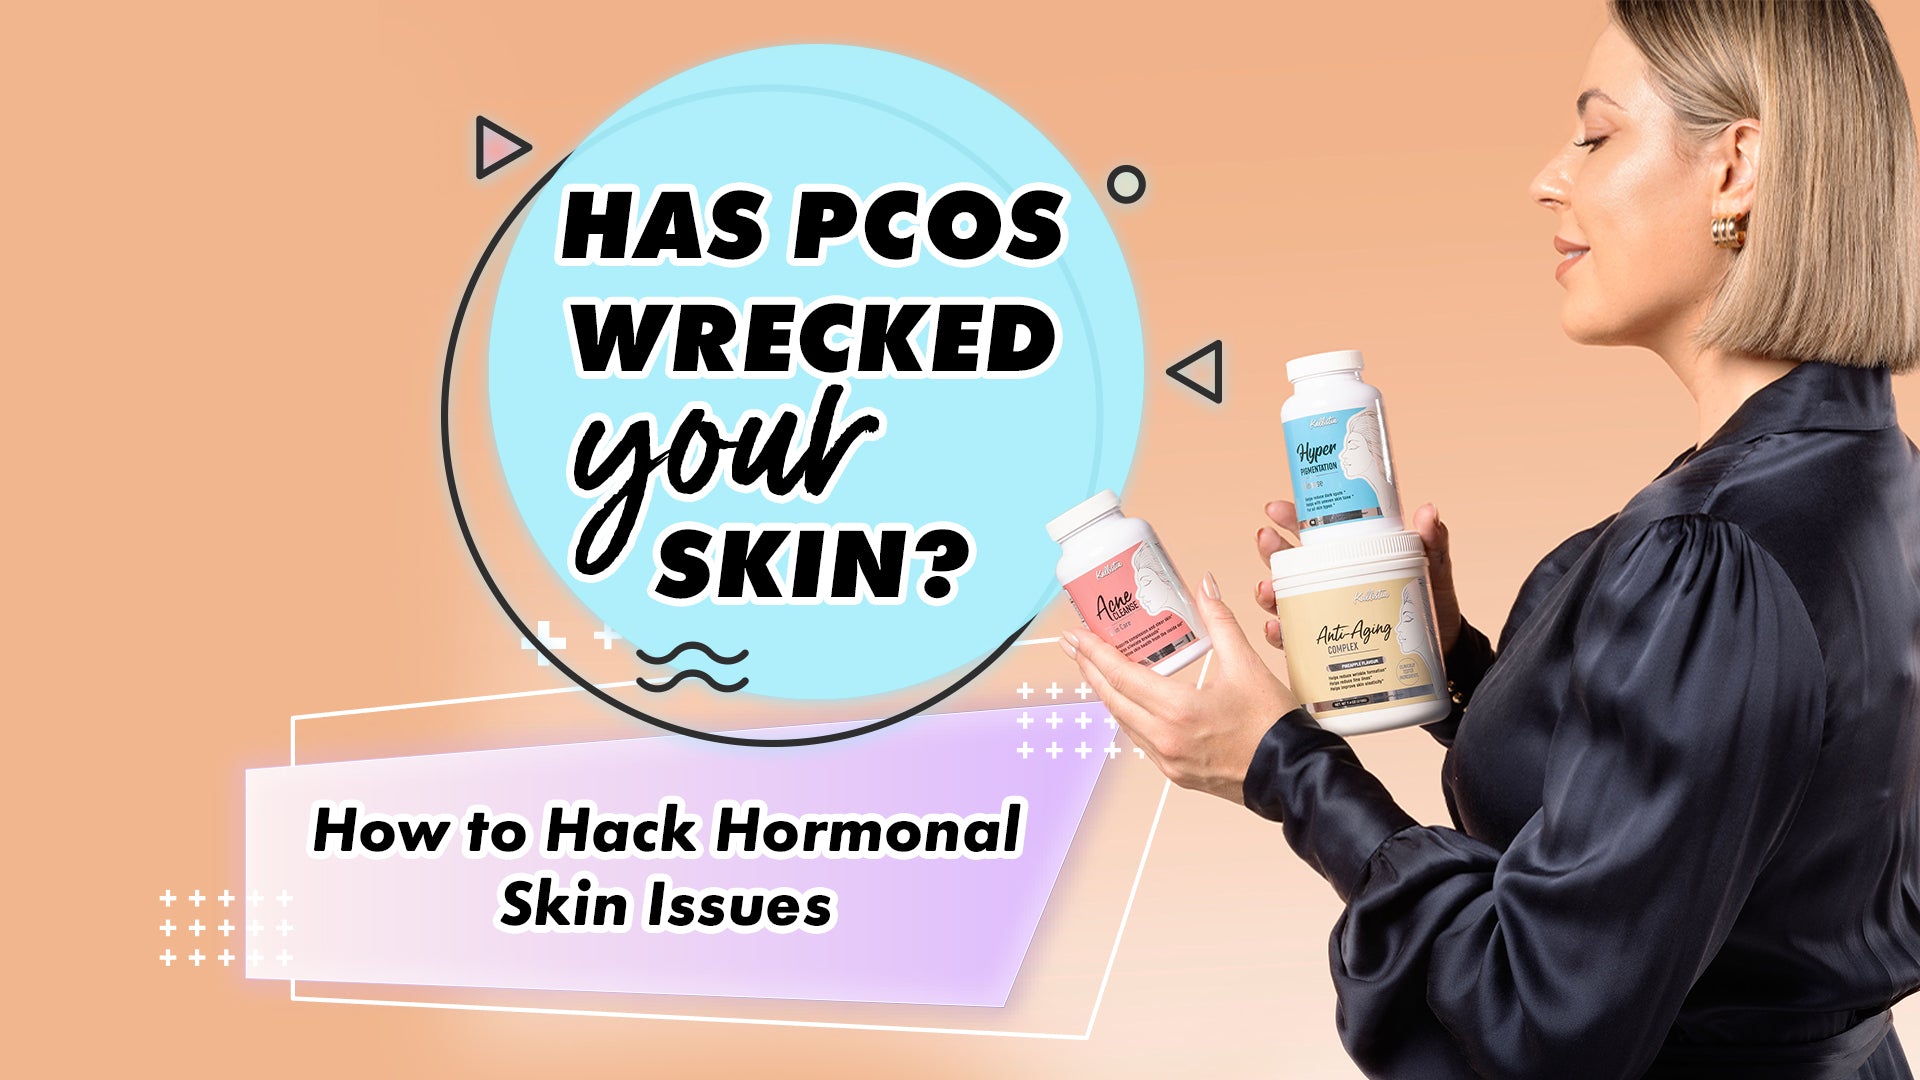 Has PCOS wrecked your skin?